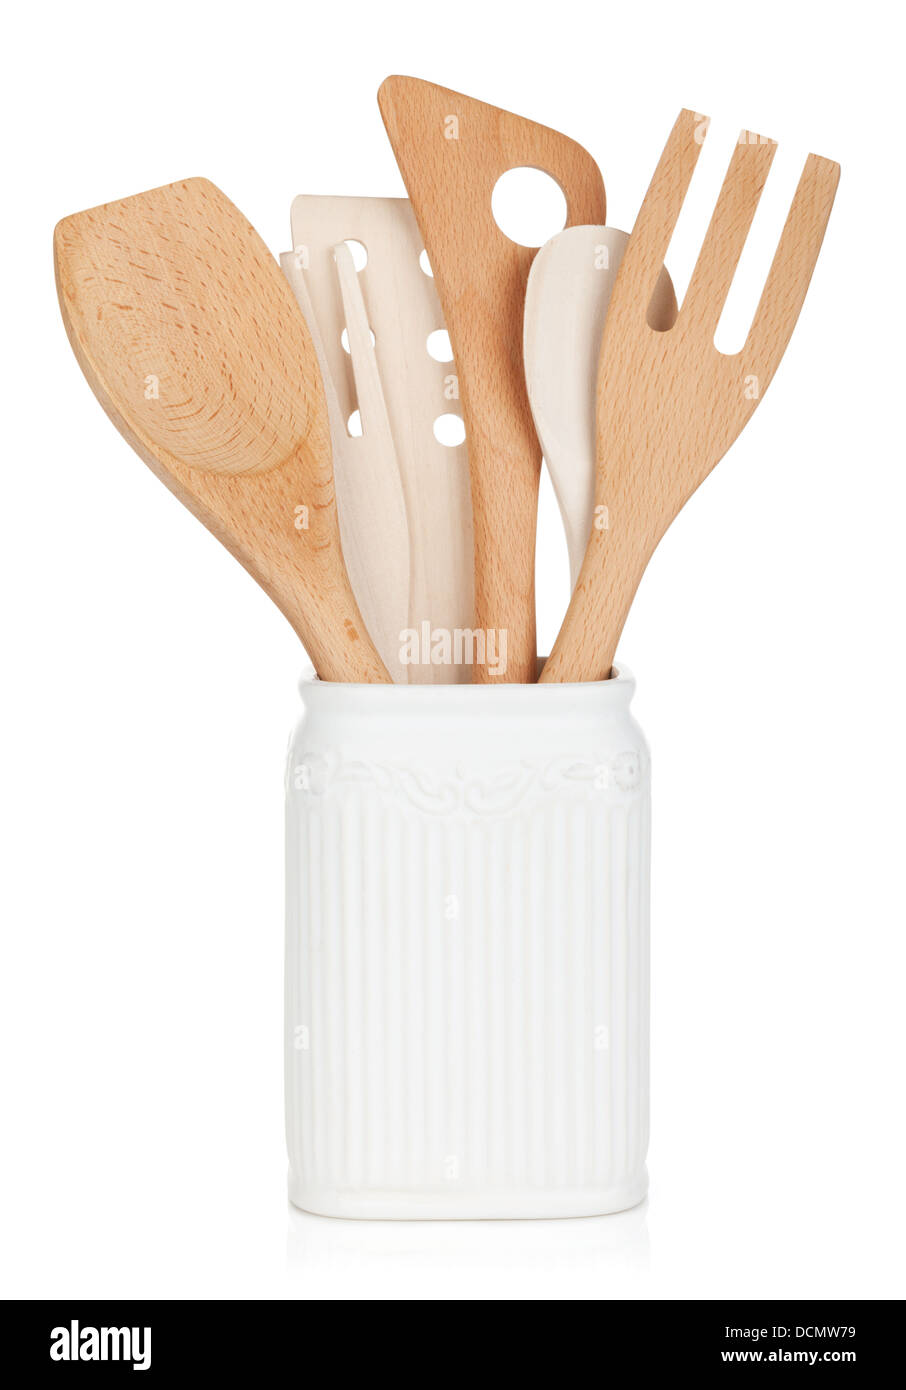 https://c8.alamy.com/comp/DCMW79/kitchen-utensils-in-holder-isolated-on-white-background-DCMW79.jpg